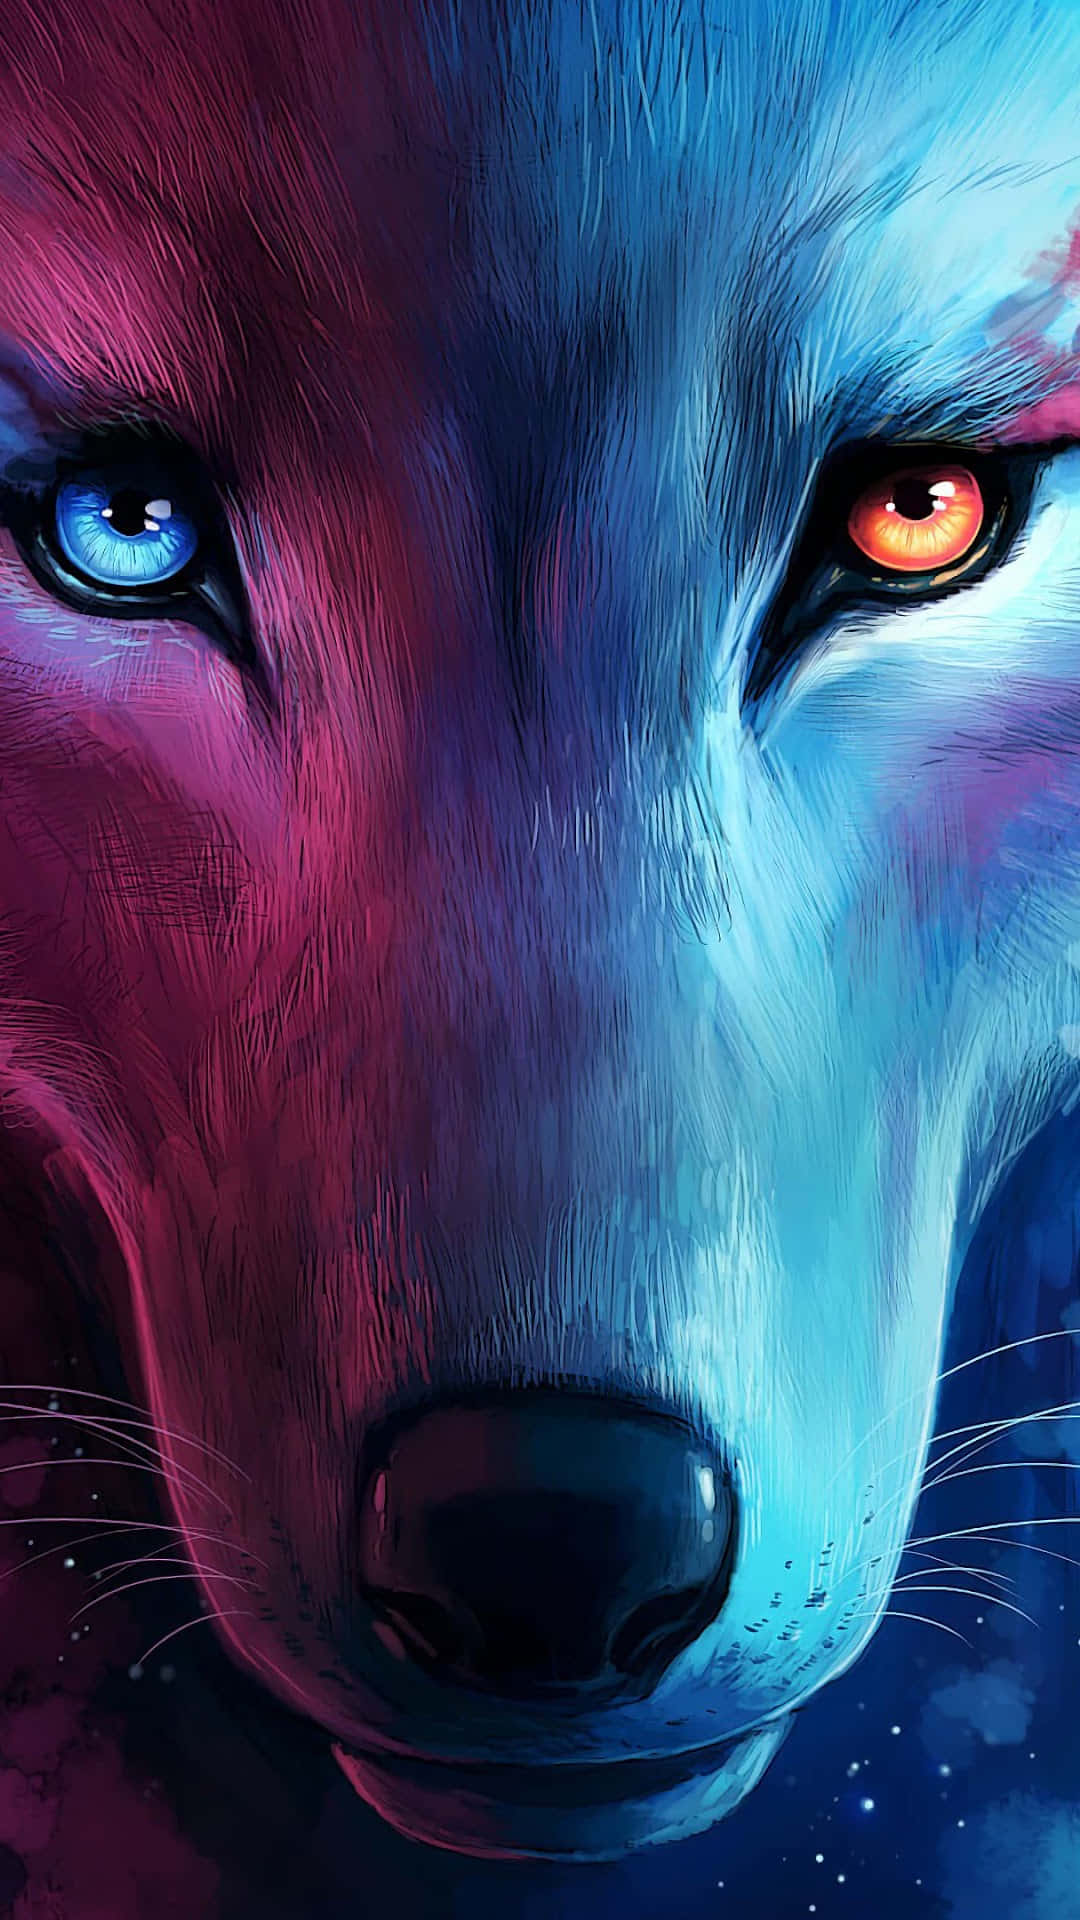 Get the power of the wolves in your pocket with Wolf Phone Wallpaper